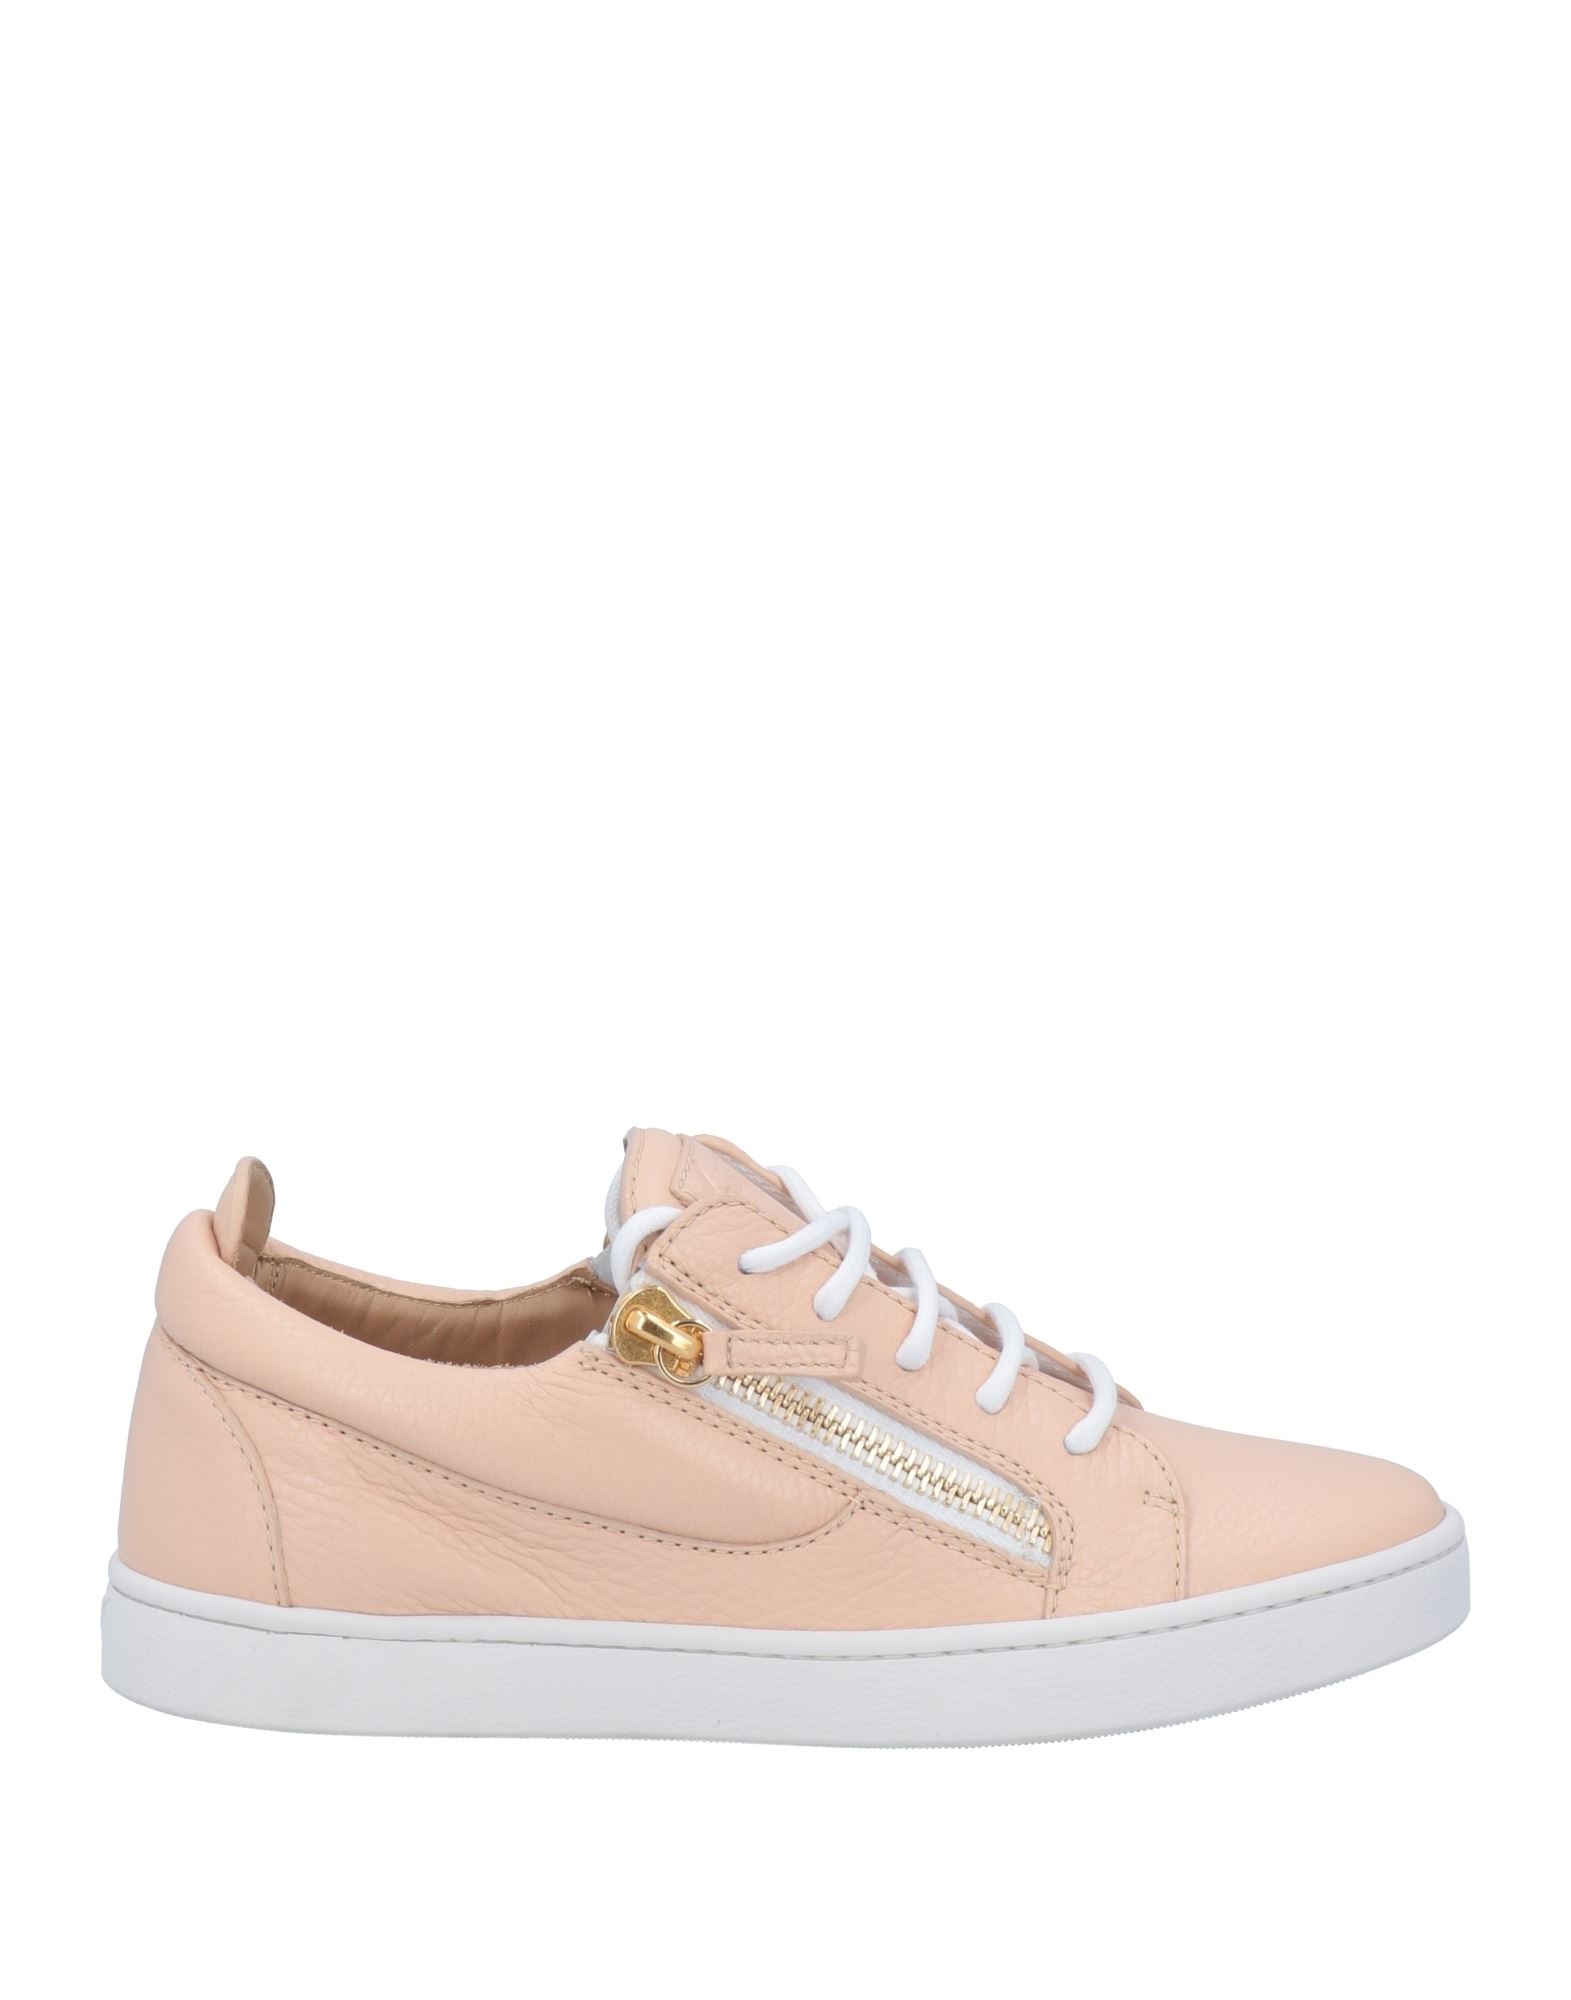 Shop Giuseppe Zanotti Woman Sneakers Blush Size 6 Soft Leather In Pink